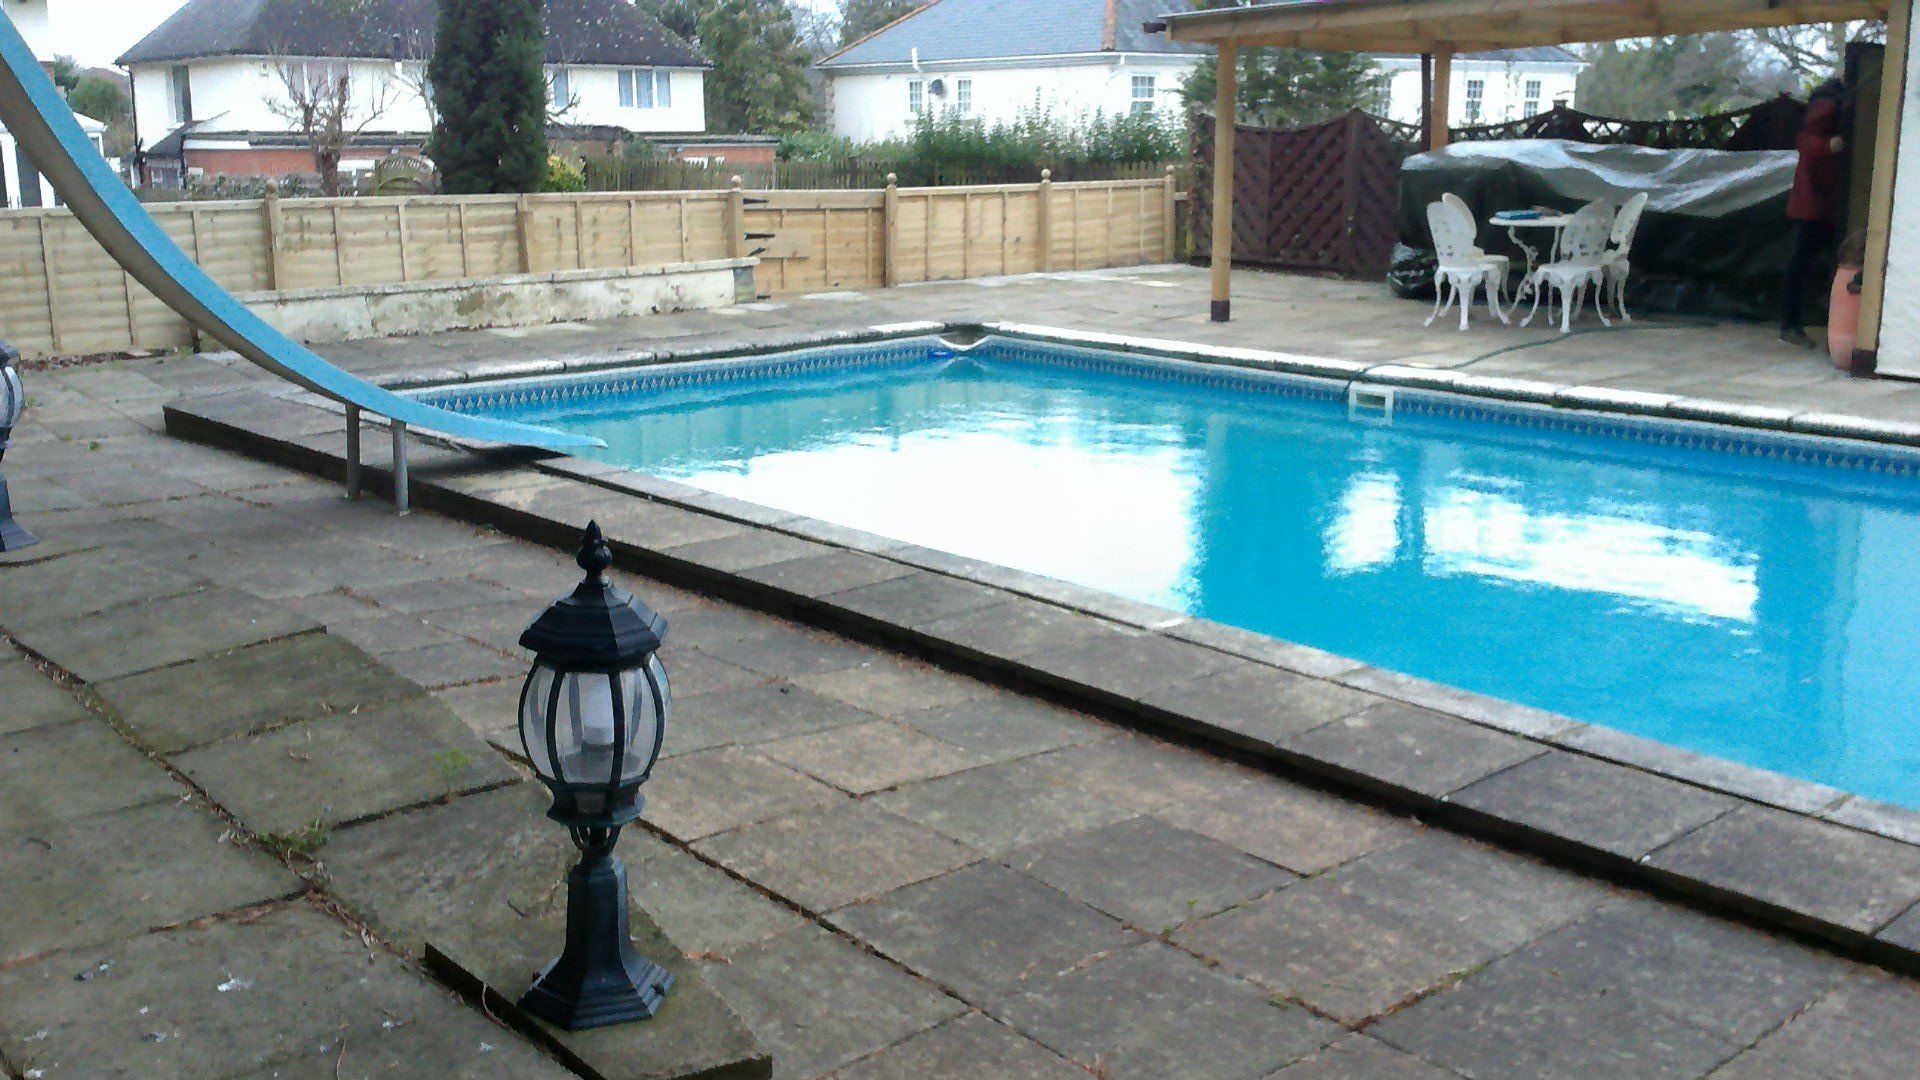 pool area before